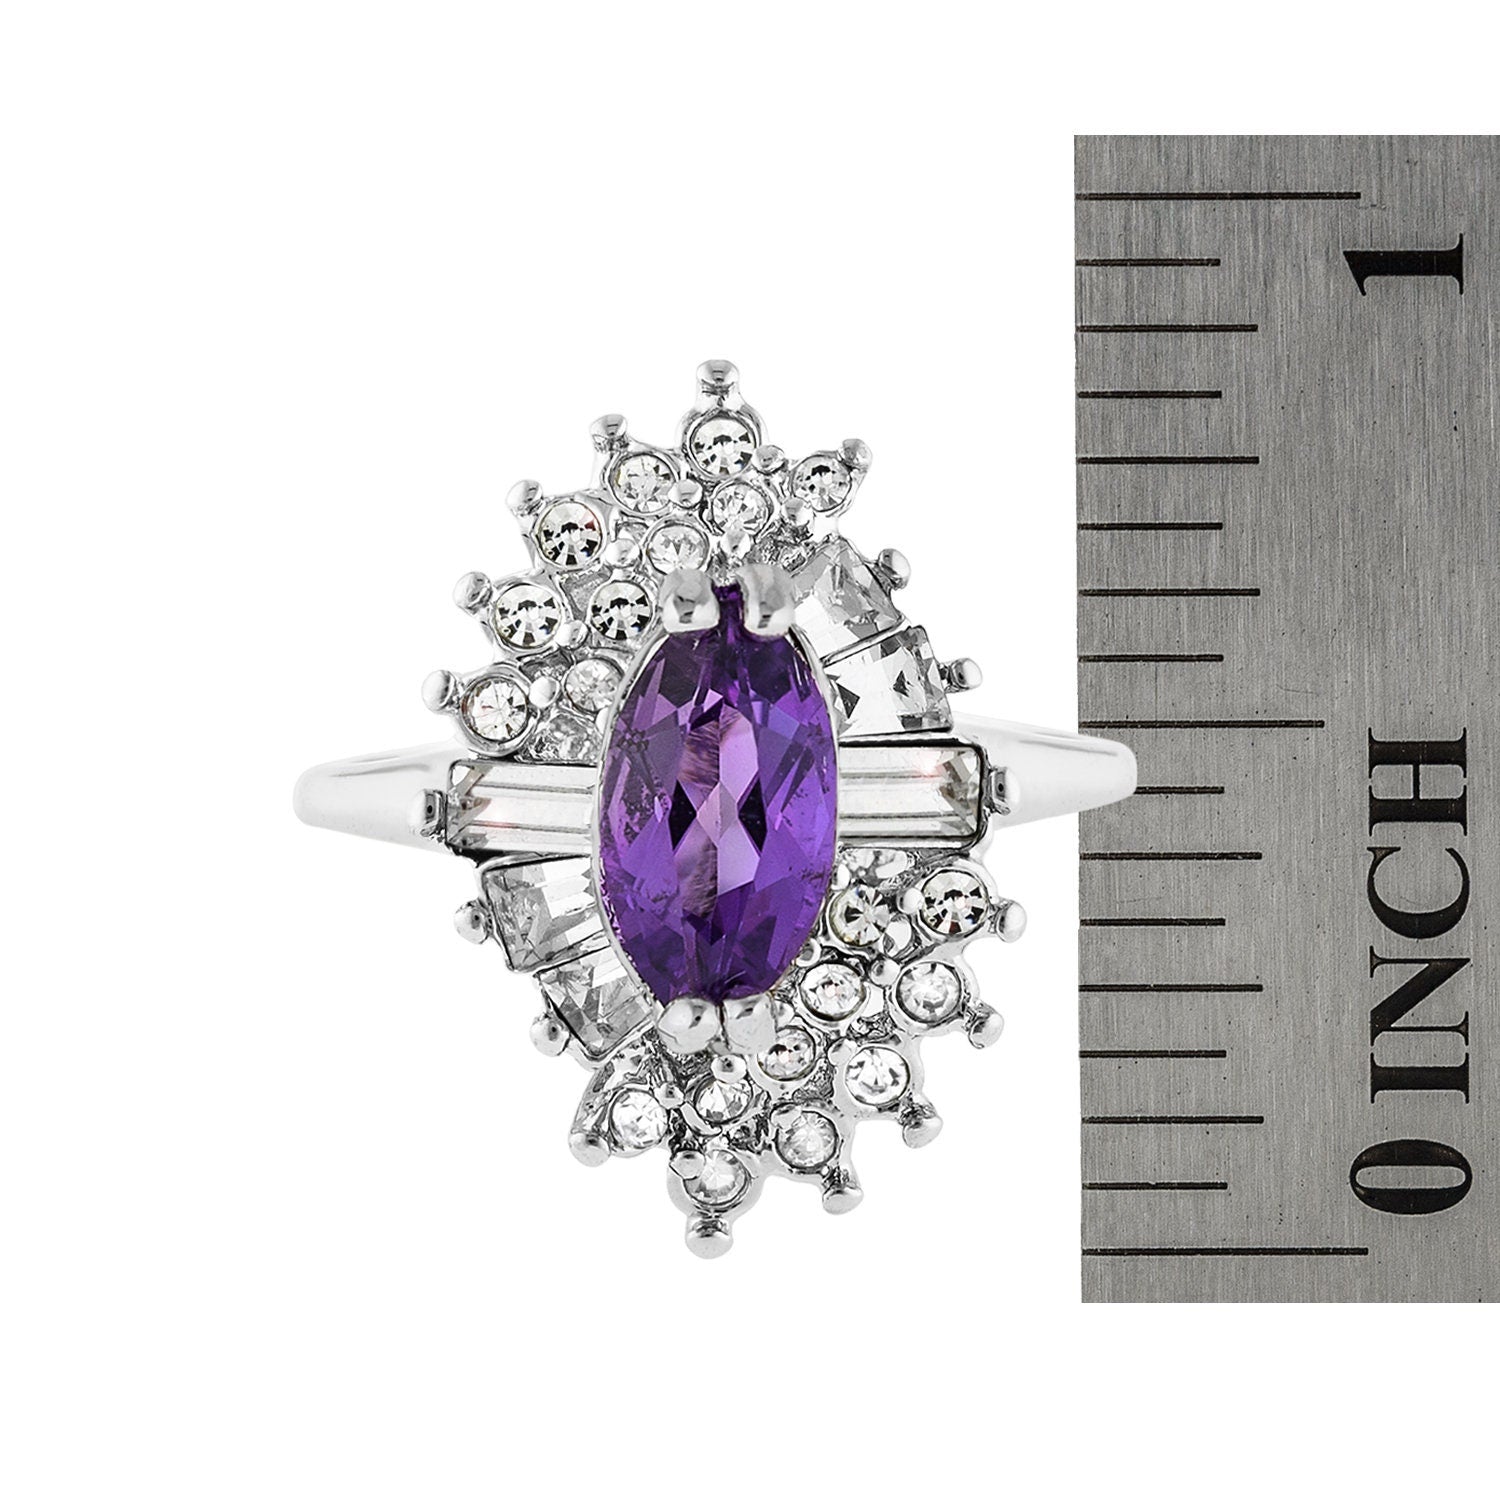 Vintage Ring 1970s Amethyst and Clear Swarovski Crystals 18k White Gold Electroplate February Birthstone Antique Womans Jewelry #R1976